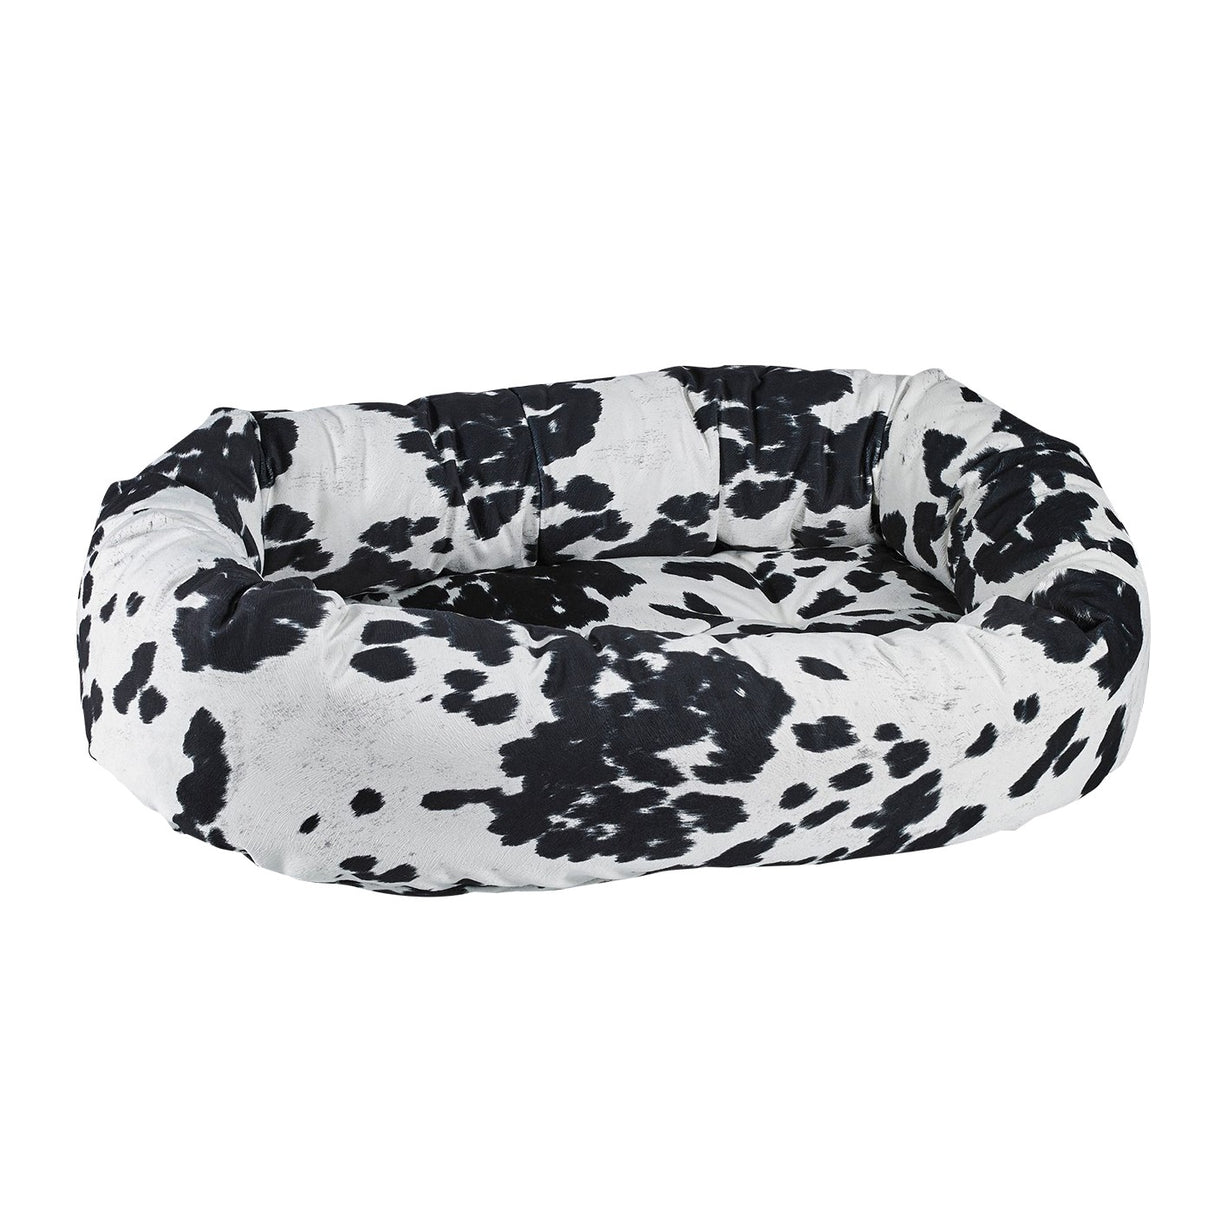 Bowser Diamond Collection Wrangler Donut Bed